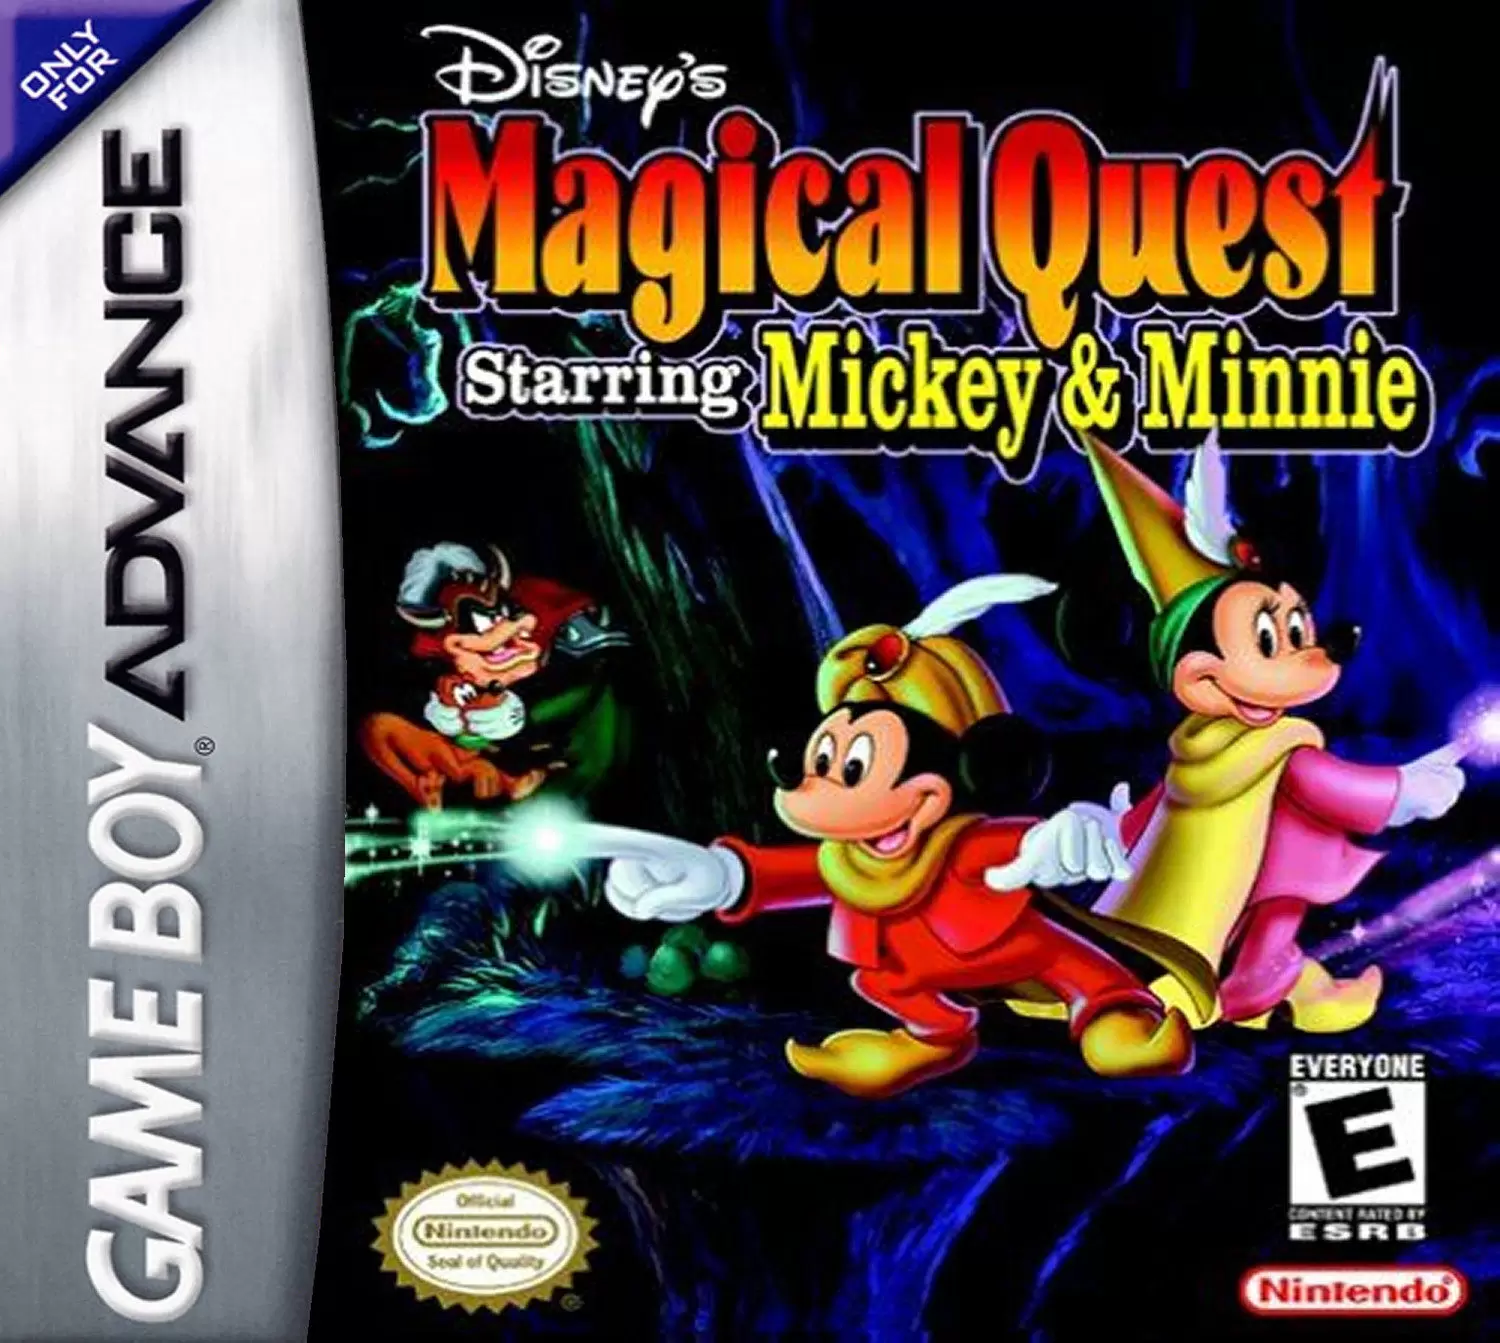 Game Boy Advance Games - Disney\'s Magical Quest Starring Mickey & Minnie